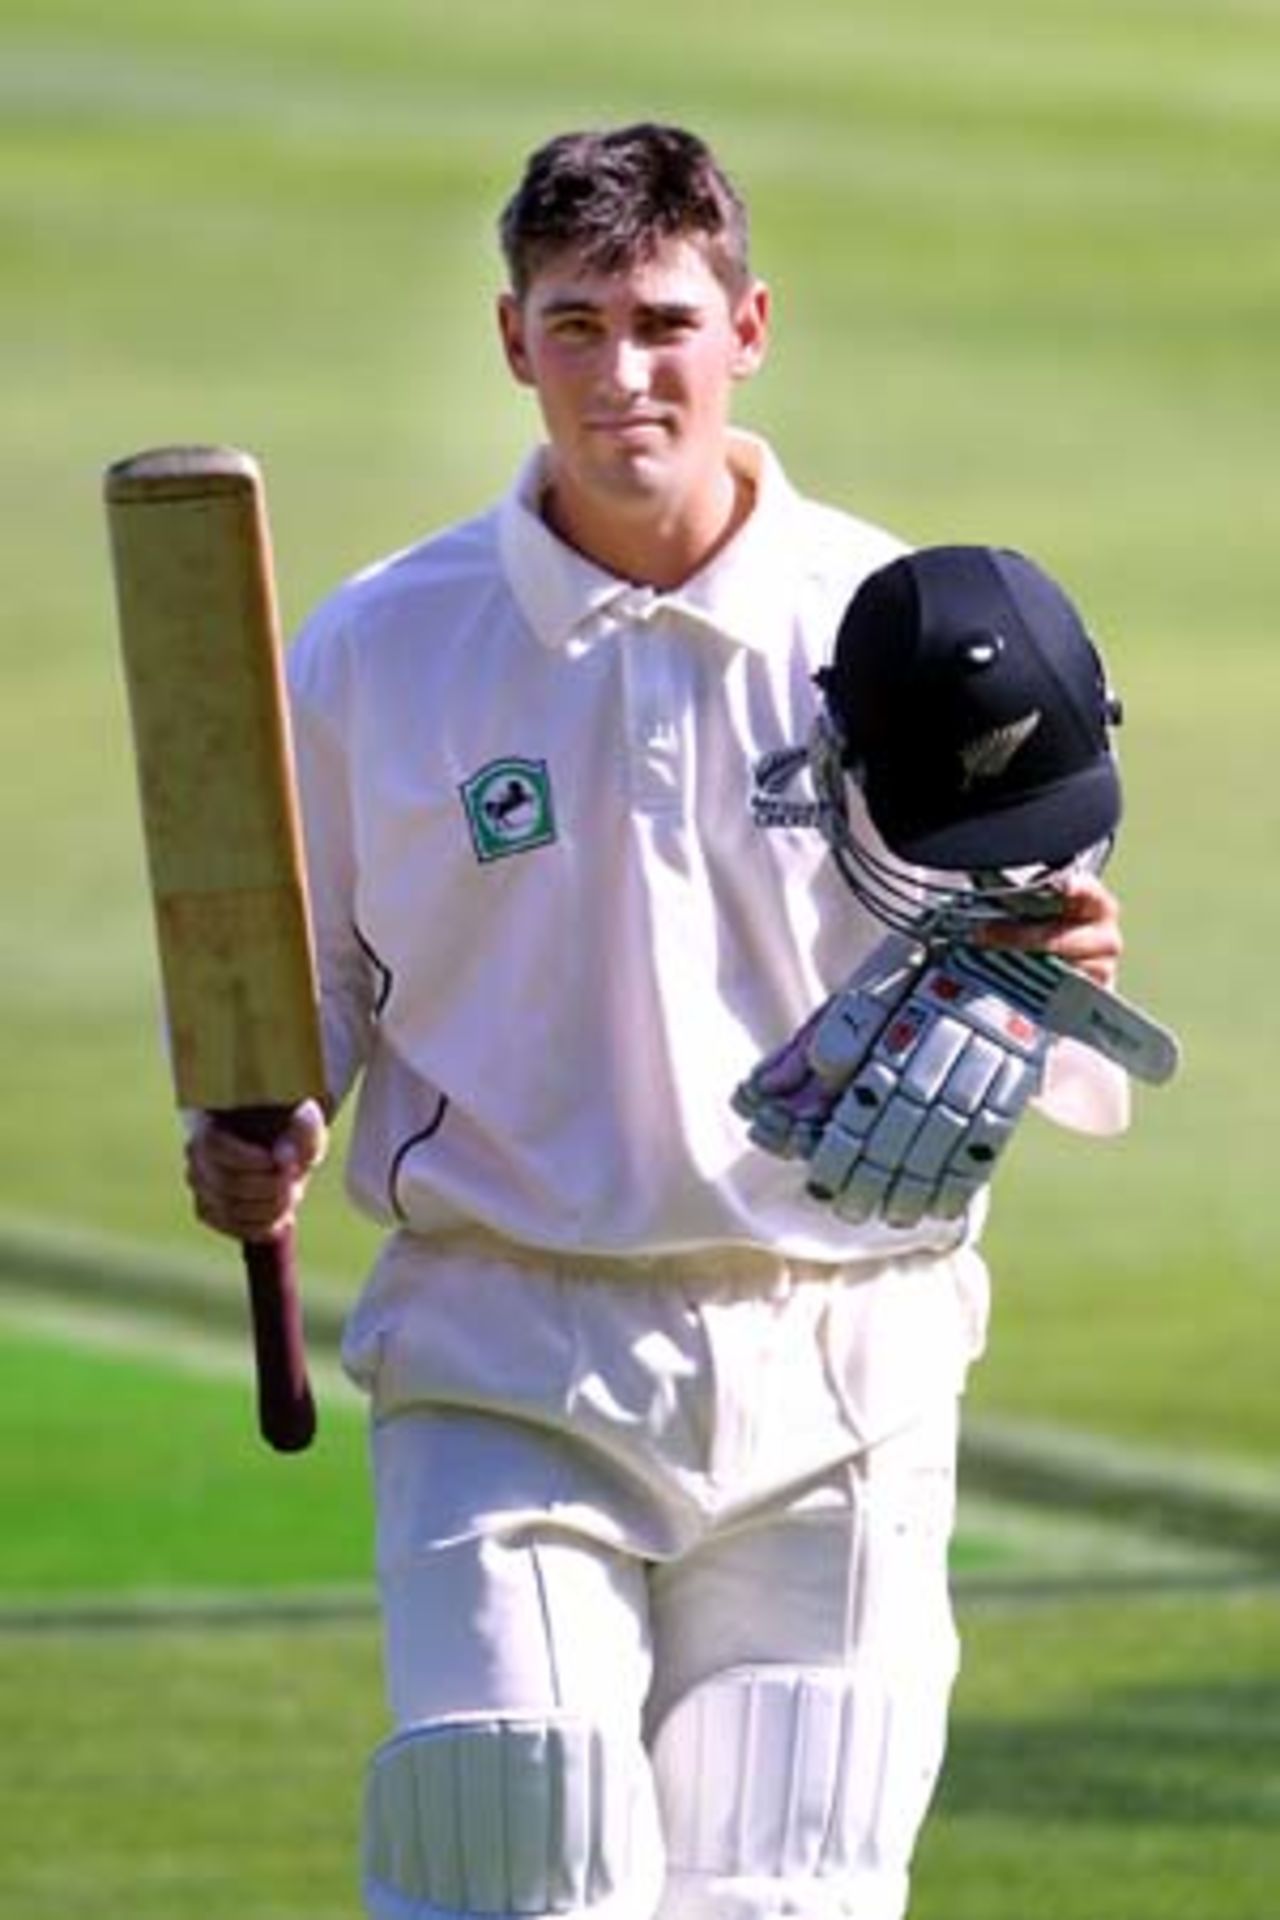 New Zealand batsman Mathew Sinclair raises his bat to the crowd as he walks from the field to a standing ovation at the end of the New Zealand innings after scoring 204 not out. Sinclair became the just second New Zealand batsman to score two Test double centuries after Glenn Turner. 2nd Test: New Zealand v Pakistan at Jade Stadium, Christchurch, 15-19 March 2001 (16 March 2001).